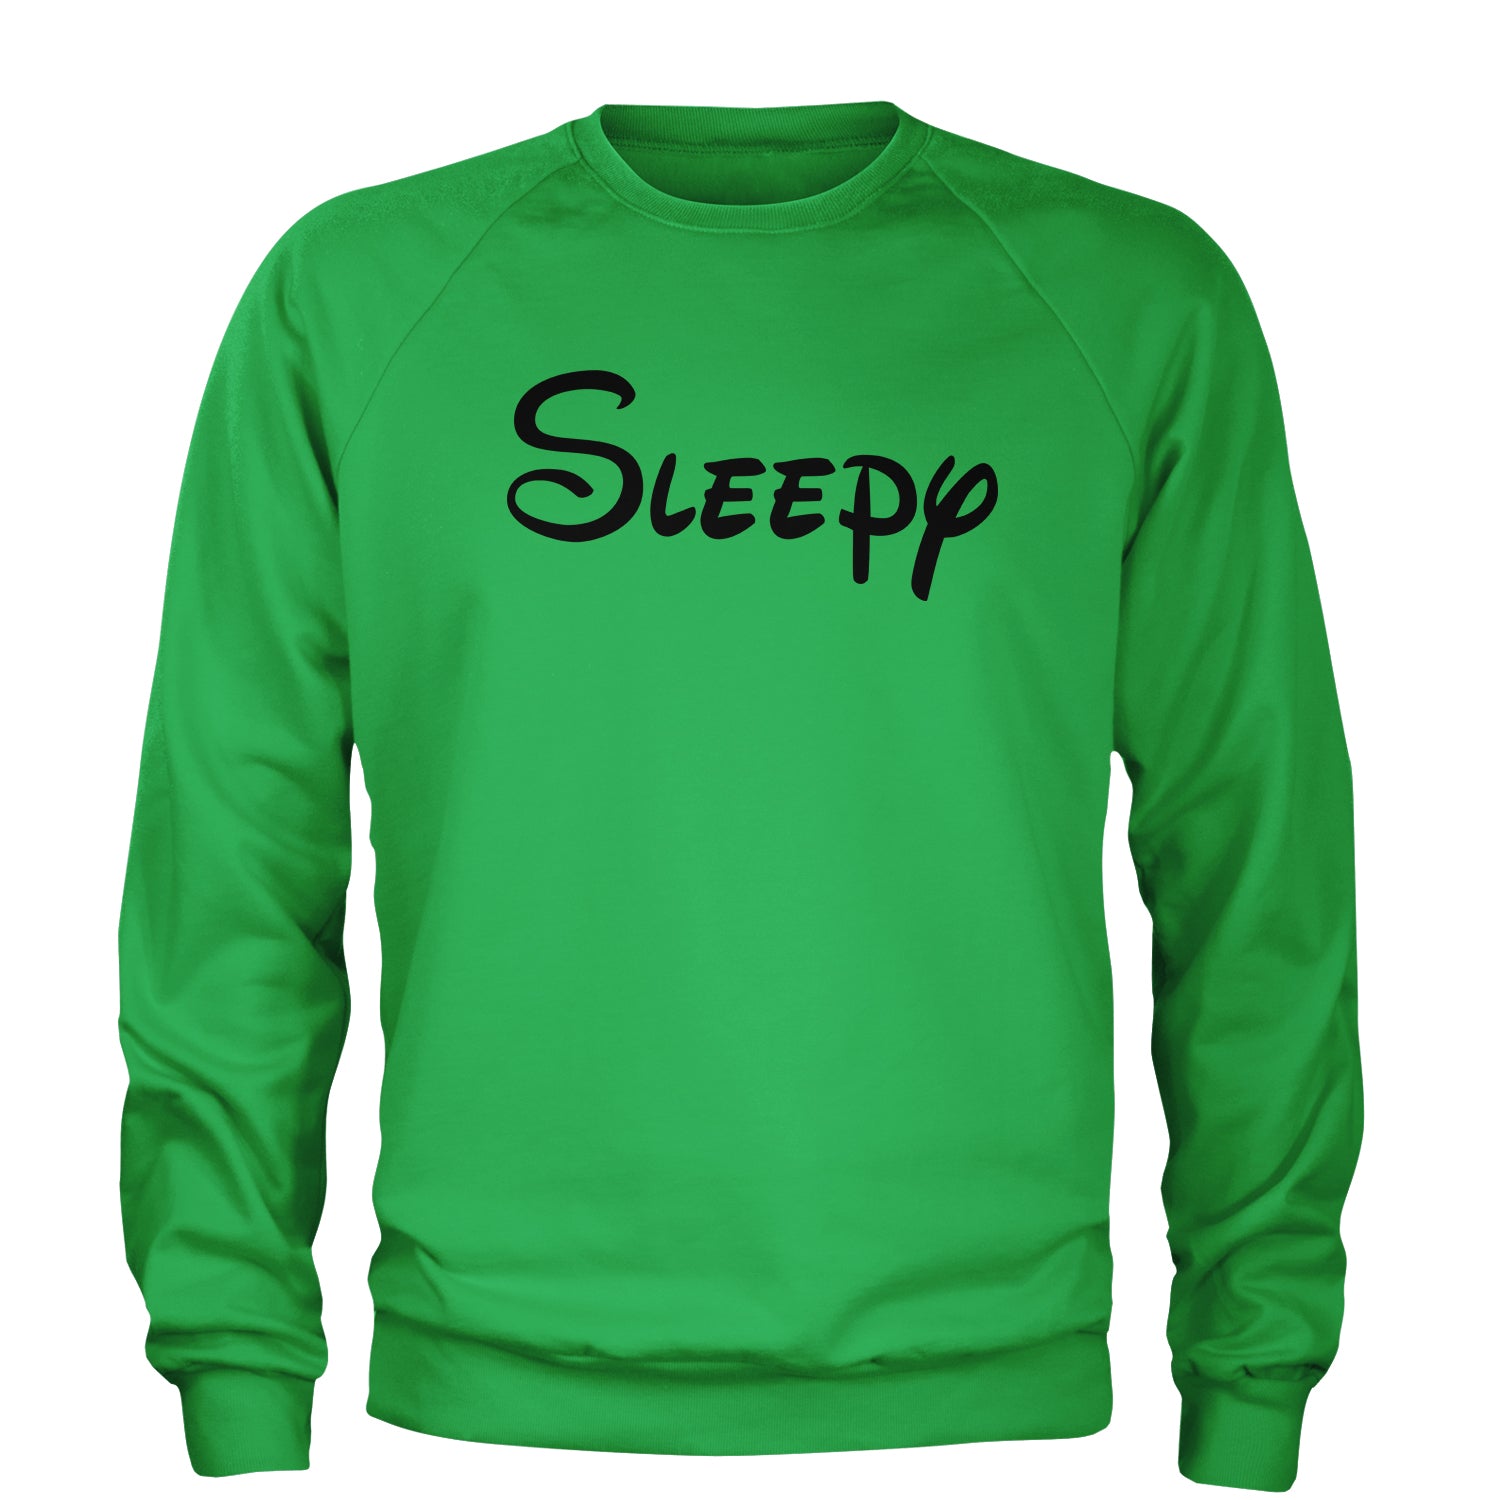 Sleepy - 7 Dwarfs Costume Adult Crewneck Sweatshirt and, costume, dwarfs, group, halloween, matching, seven, snow, the, white by Expression Tees